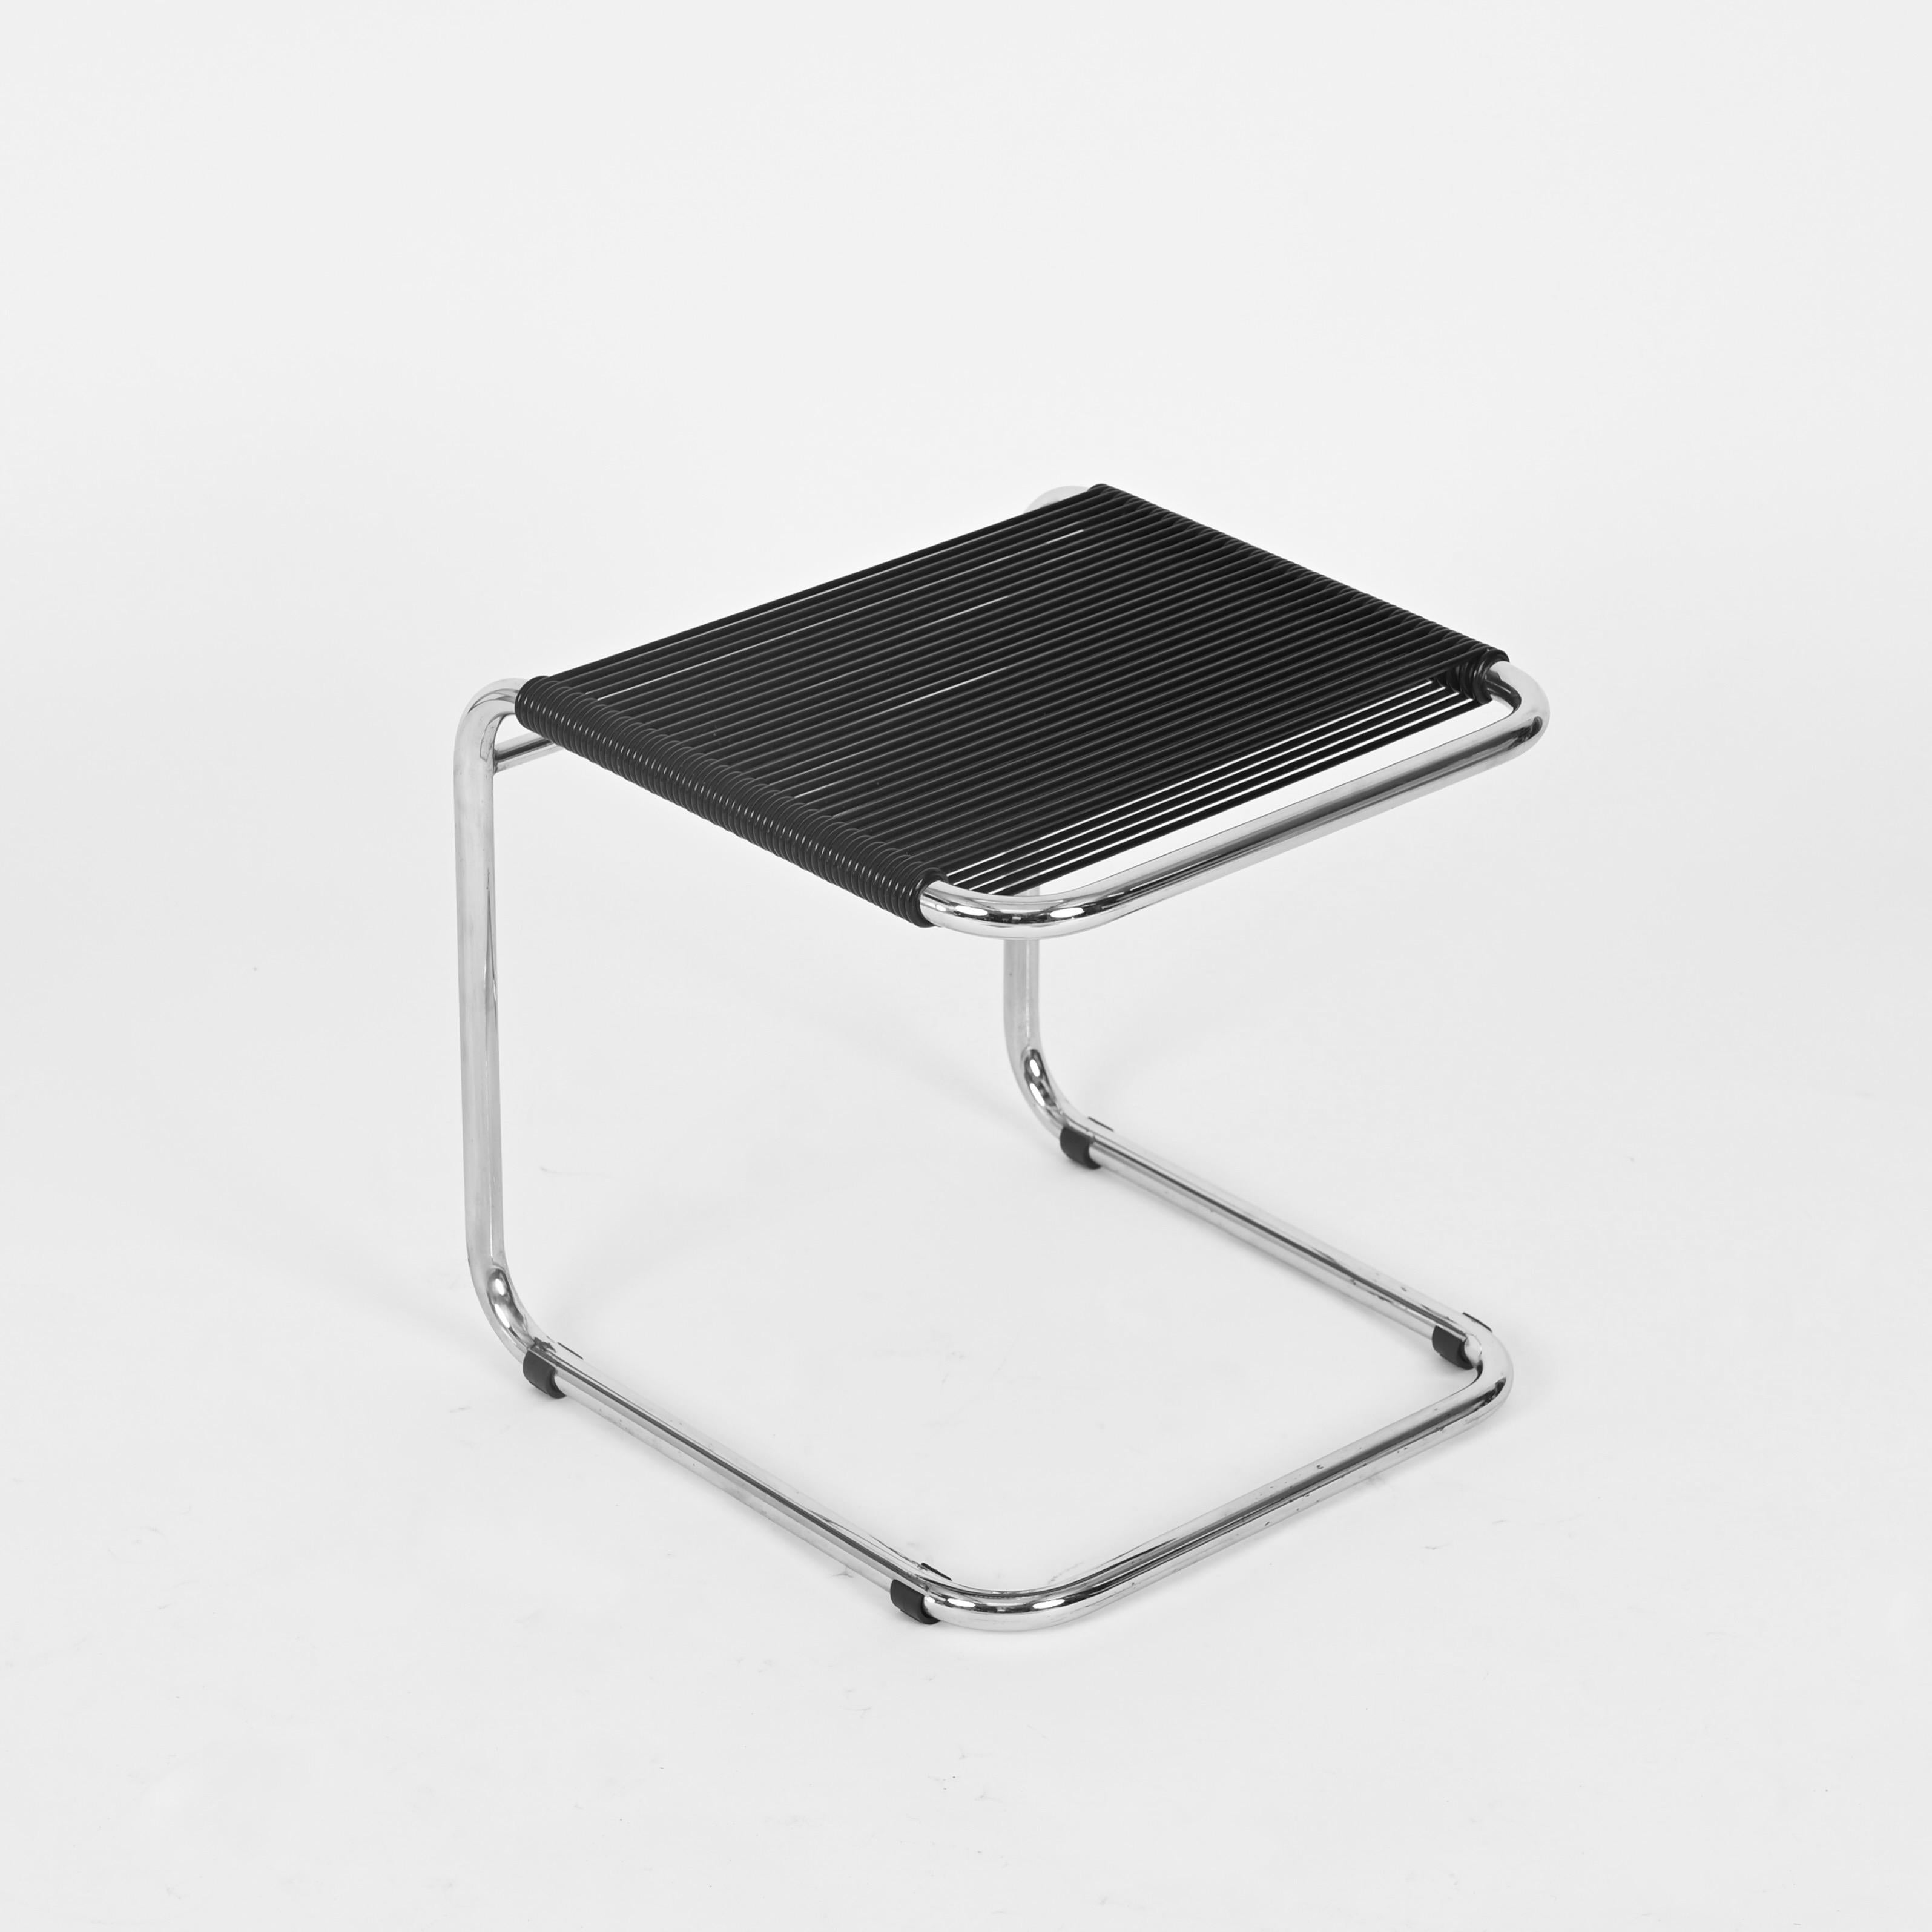 Gorgeous Mid-Century stool in chromed tubular steel and black knotted rubber cord. This stylish object was designed by Andre Dupre and produced by Knoll during 1950s.

This polyhedric item could be used as a stool or ottoman and would look great in